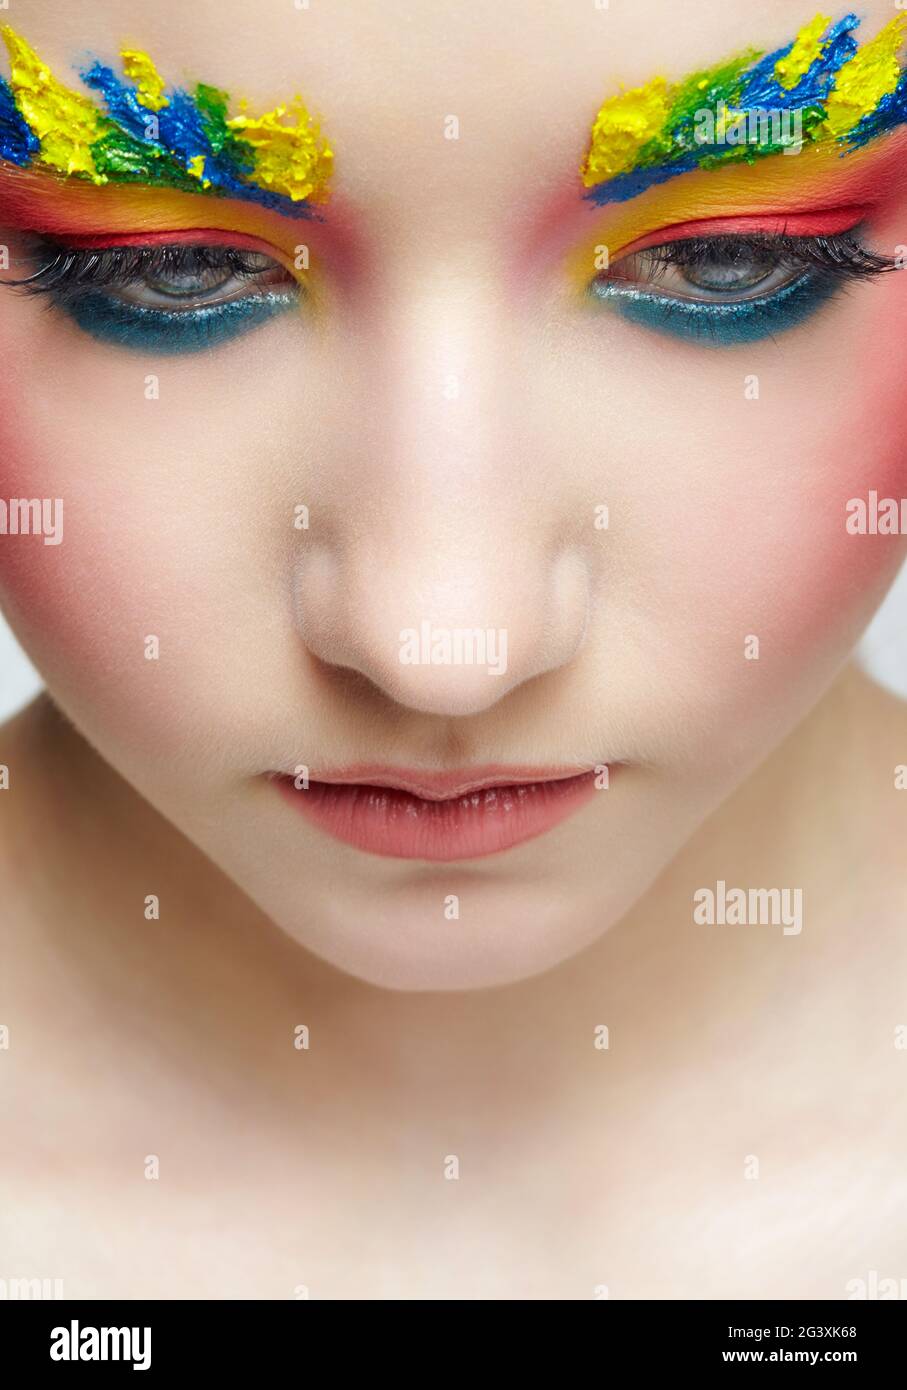 Close-up teenager girl face portrait with face art make-up . Paint on brows Stock Photo